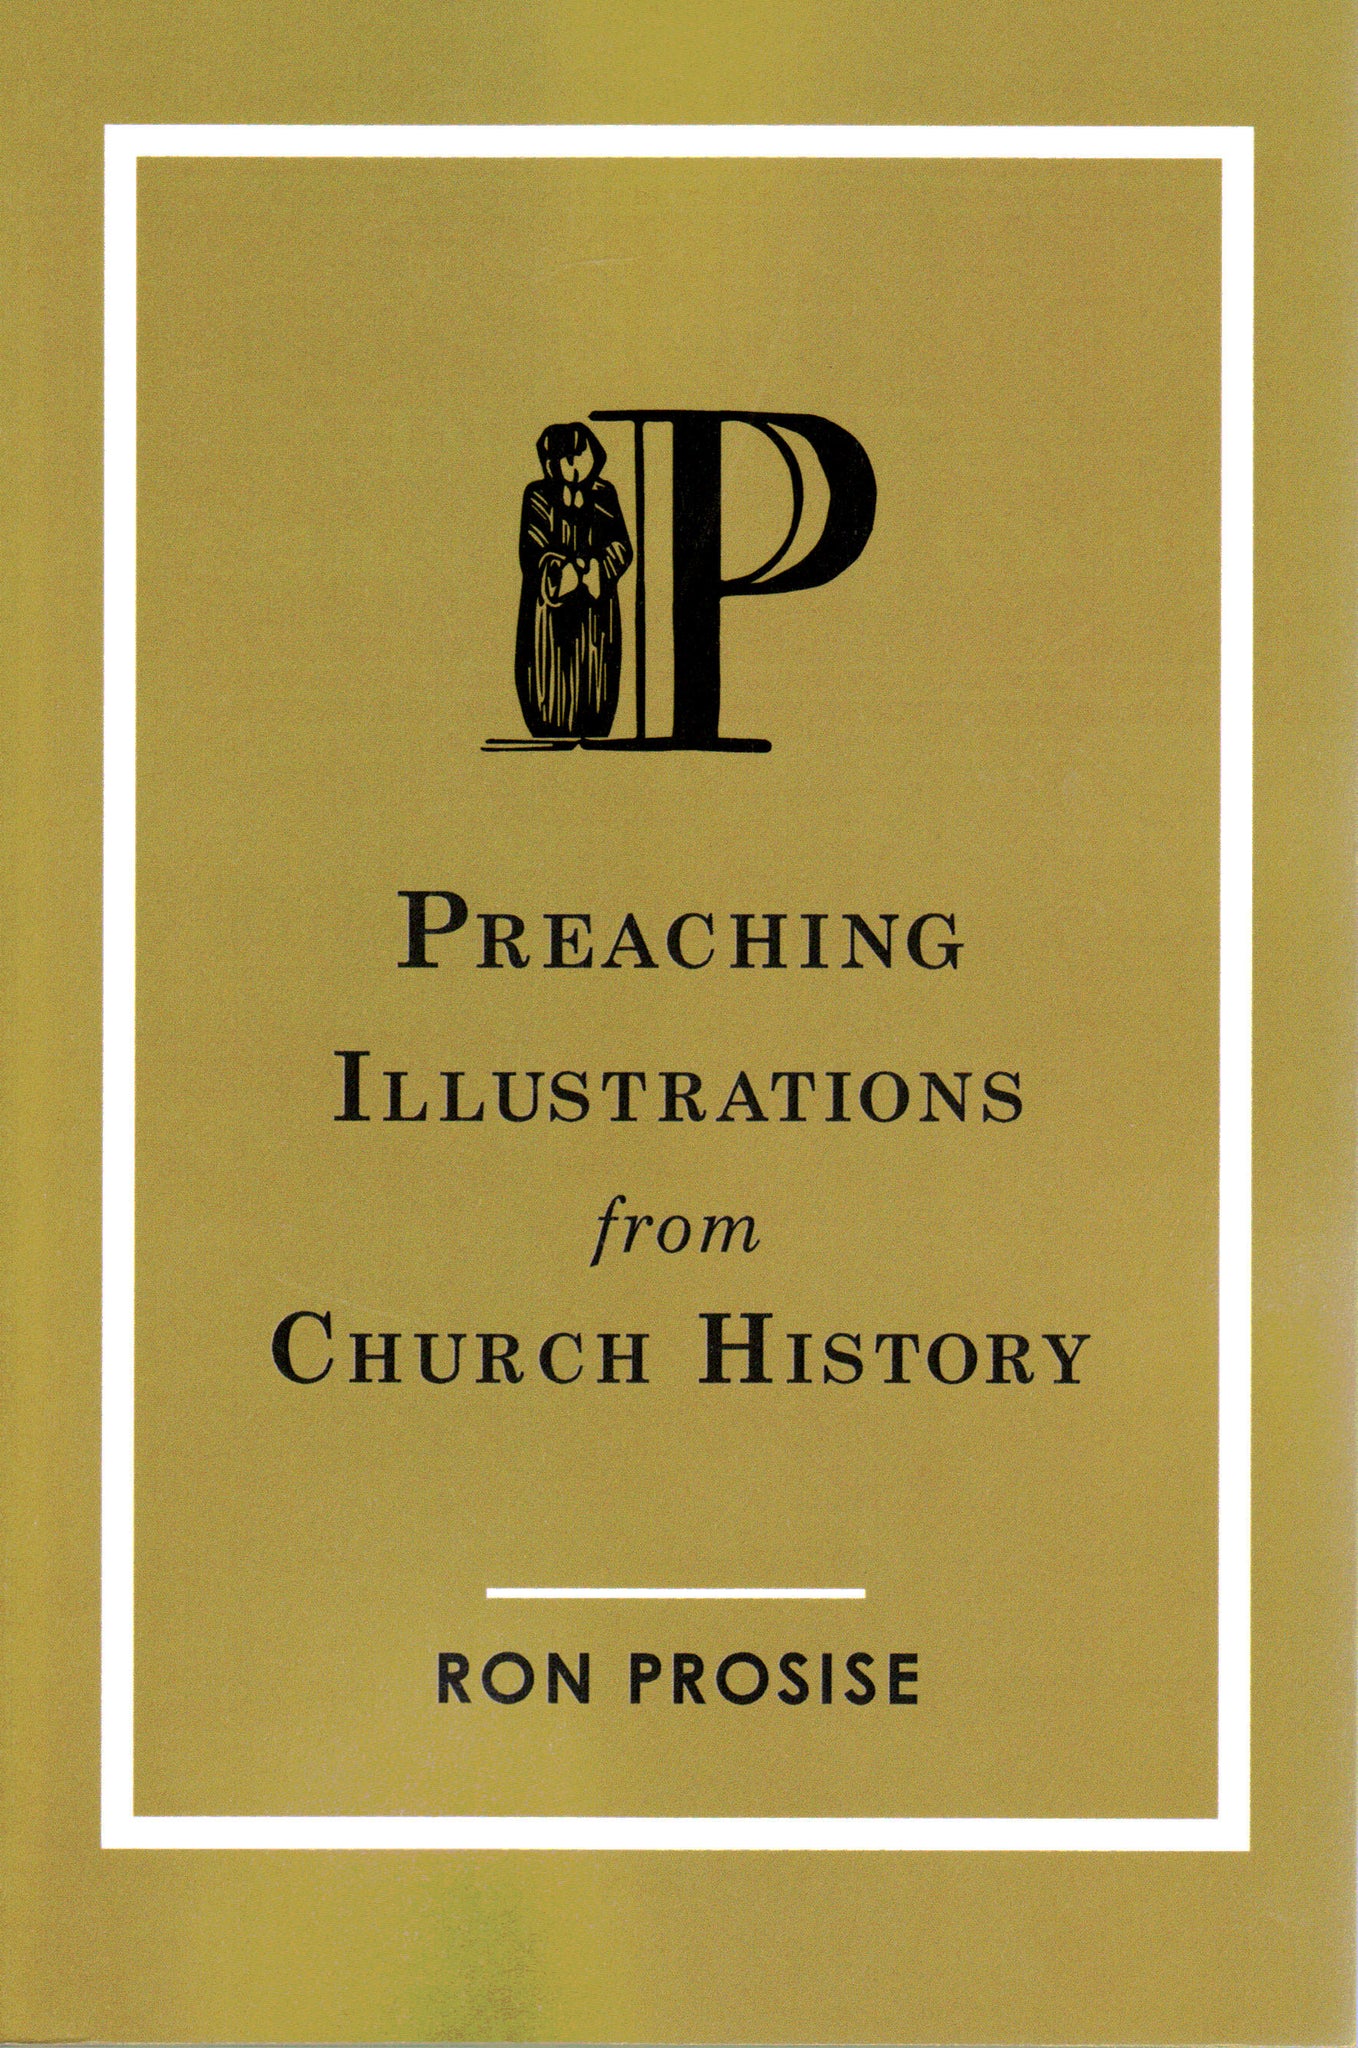 Preaching Illustrations from Church History